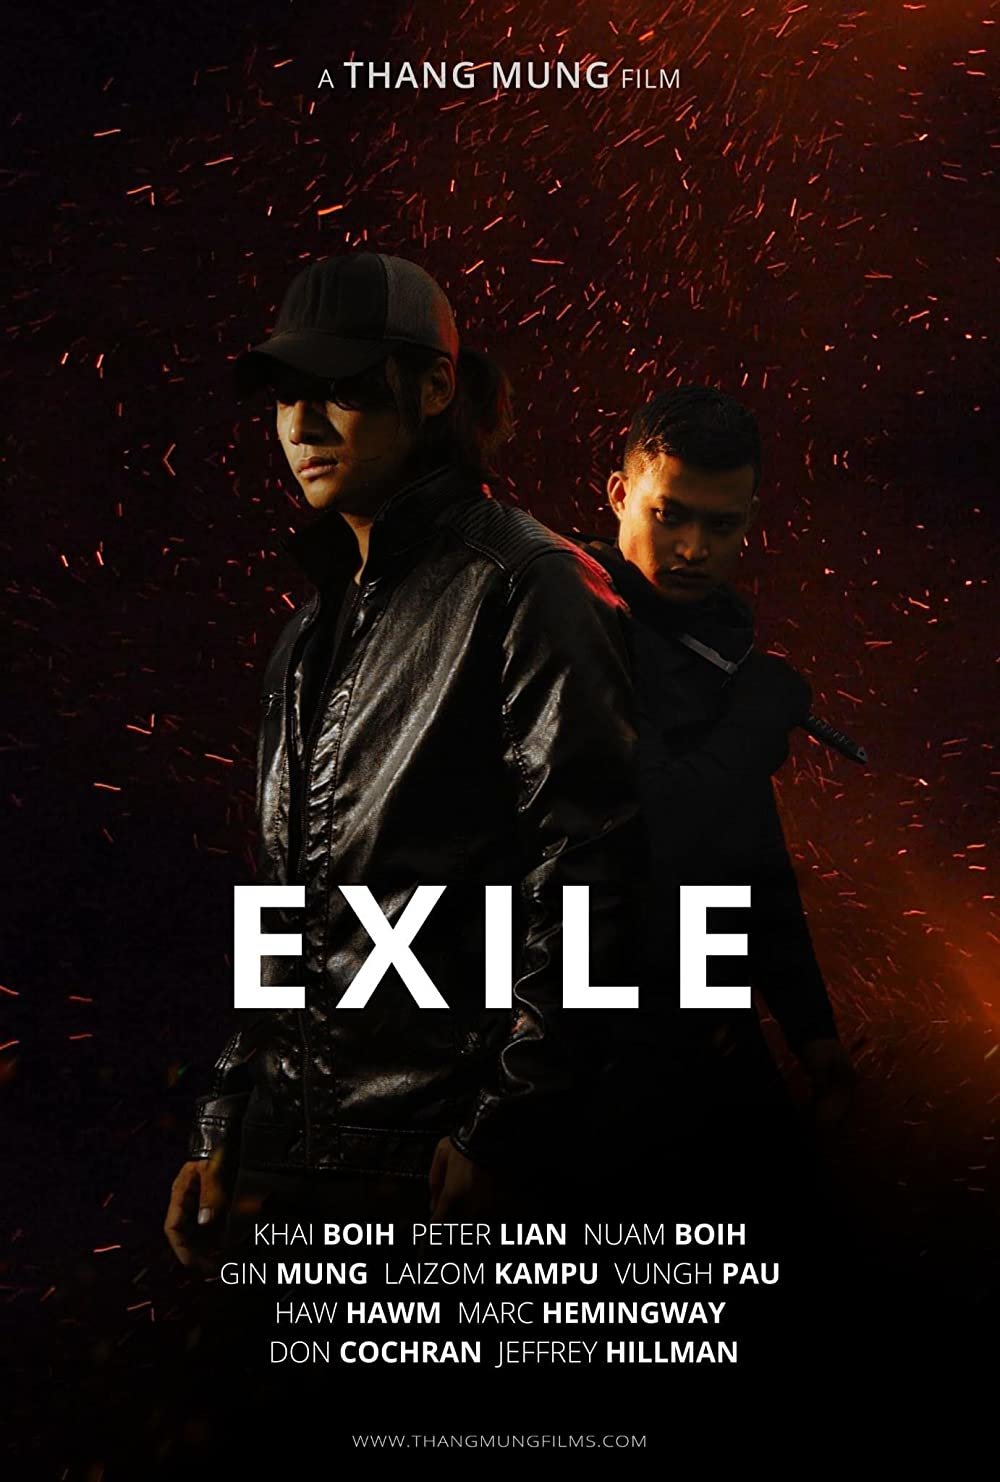 "Exile," the new feature film from Thang Mung Films and iStar Video Production, is playing at Celebration Cinema theaters across the state this weekend.